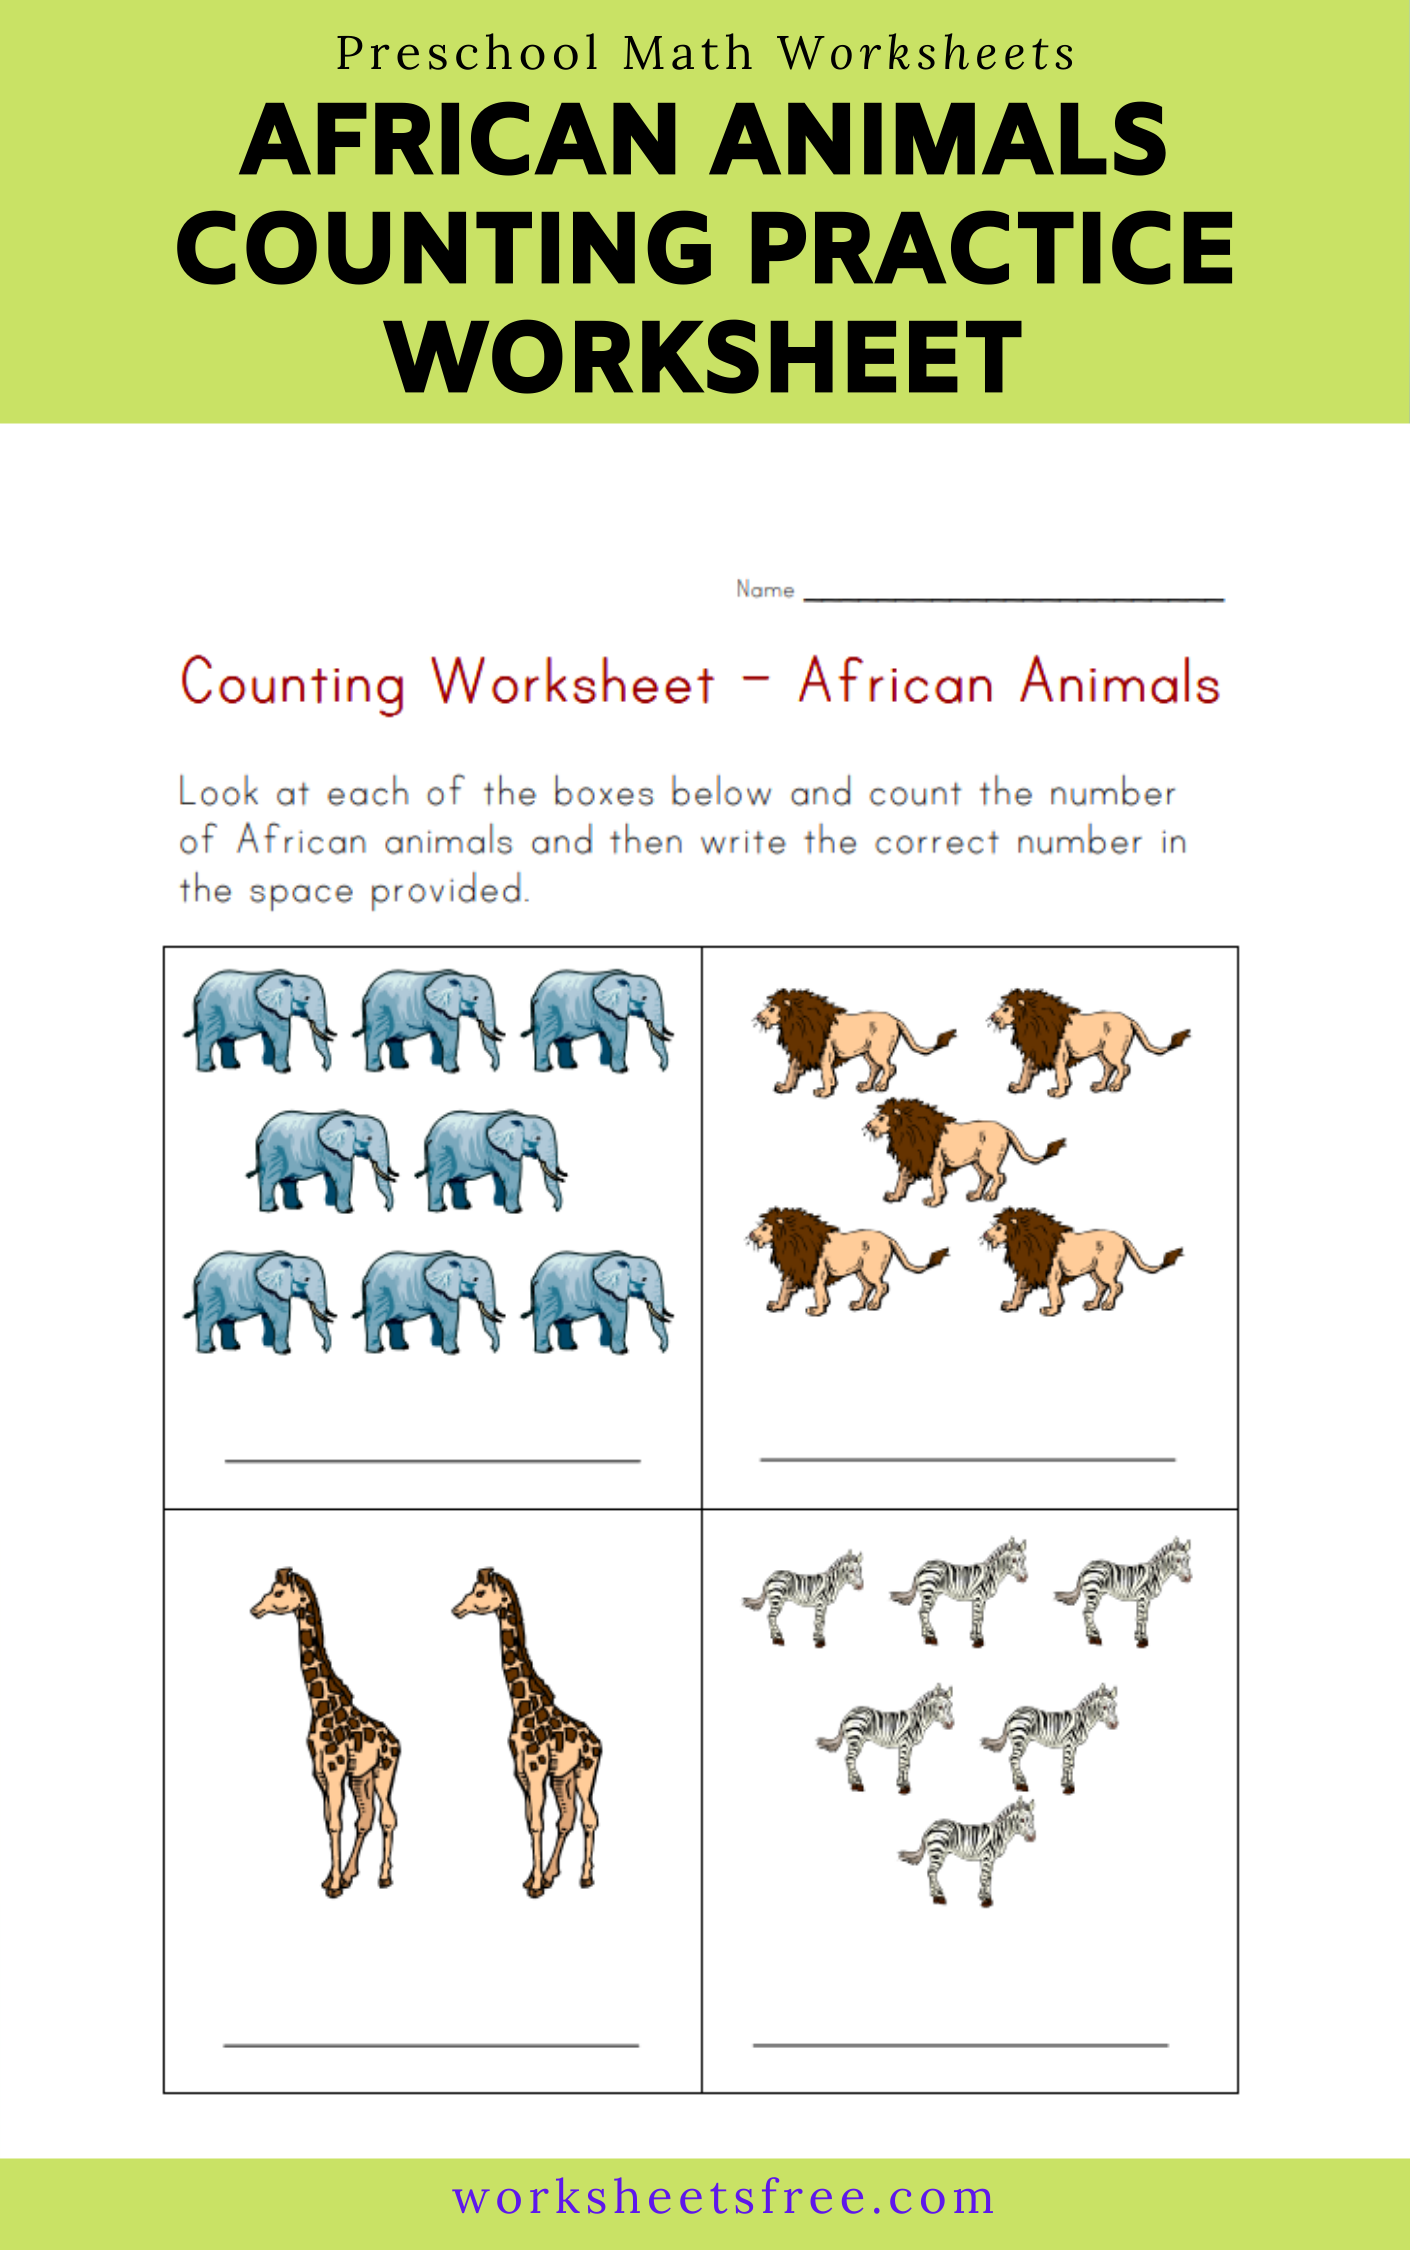 african-animals-counting-practice-worksheet-worksheets-free